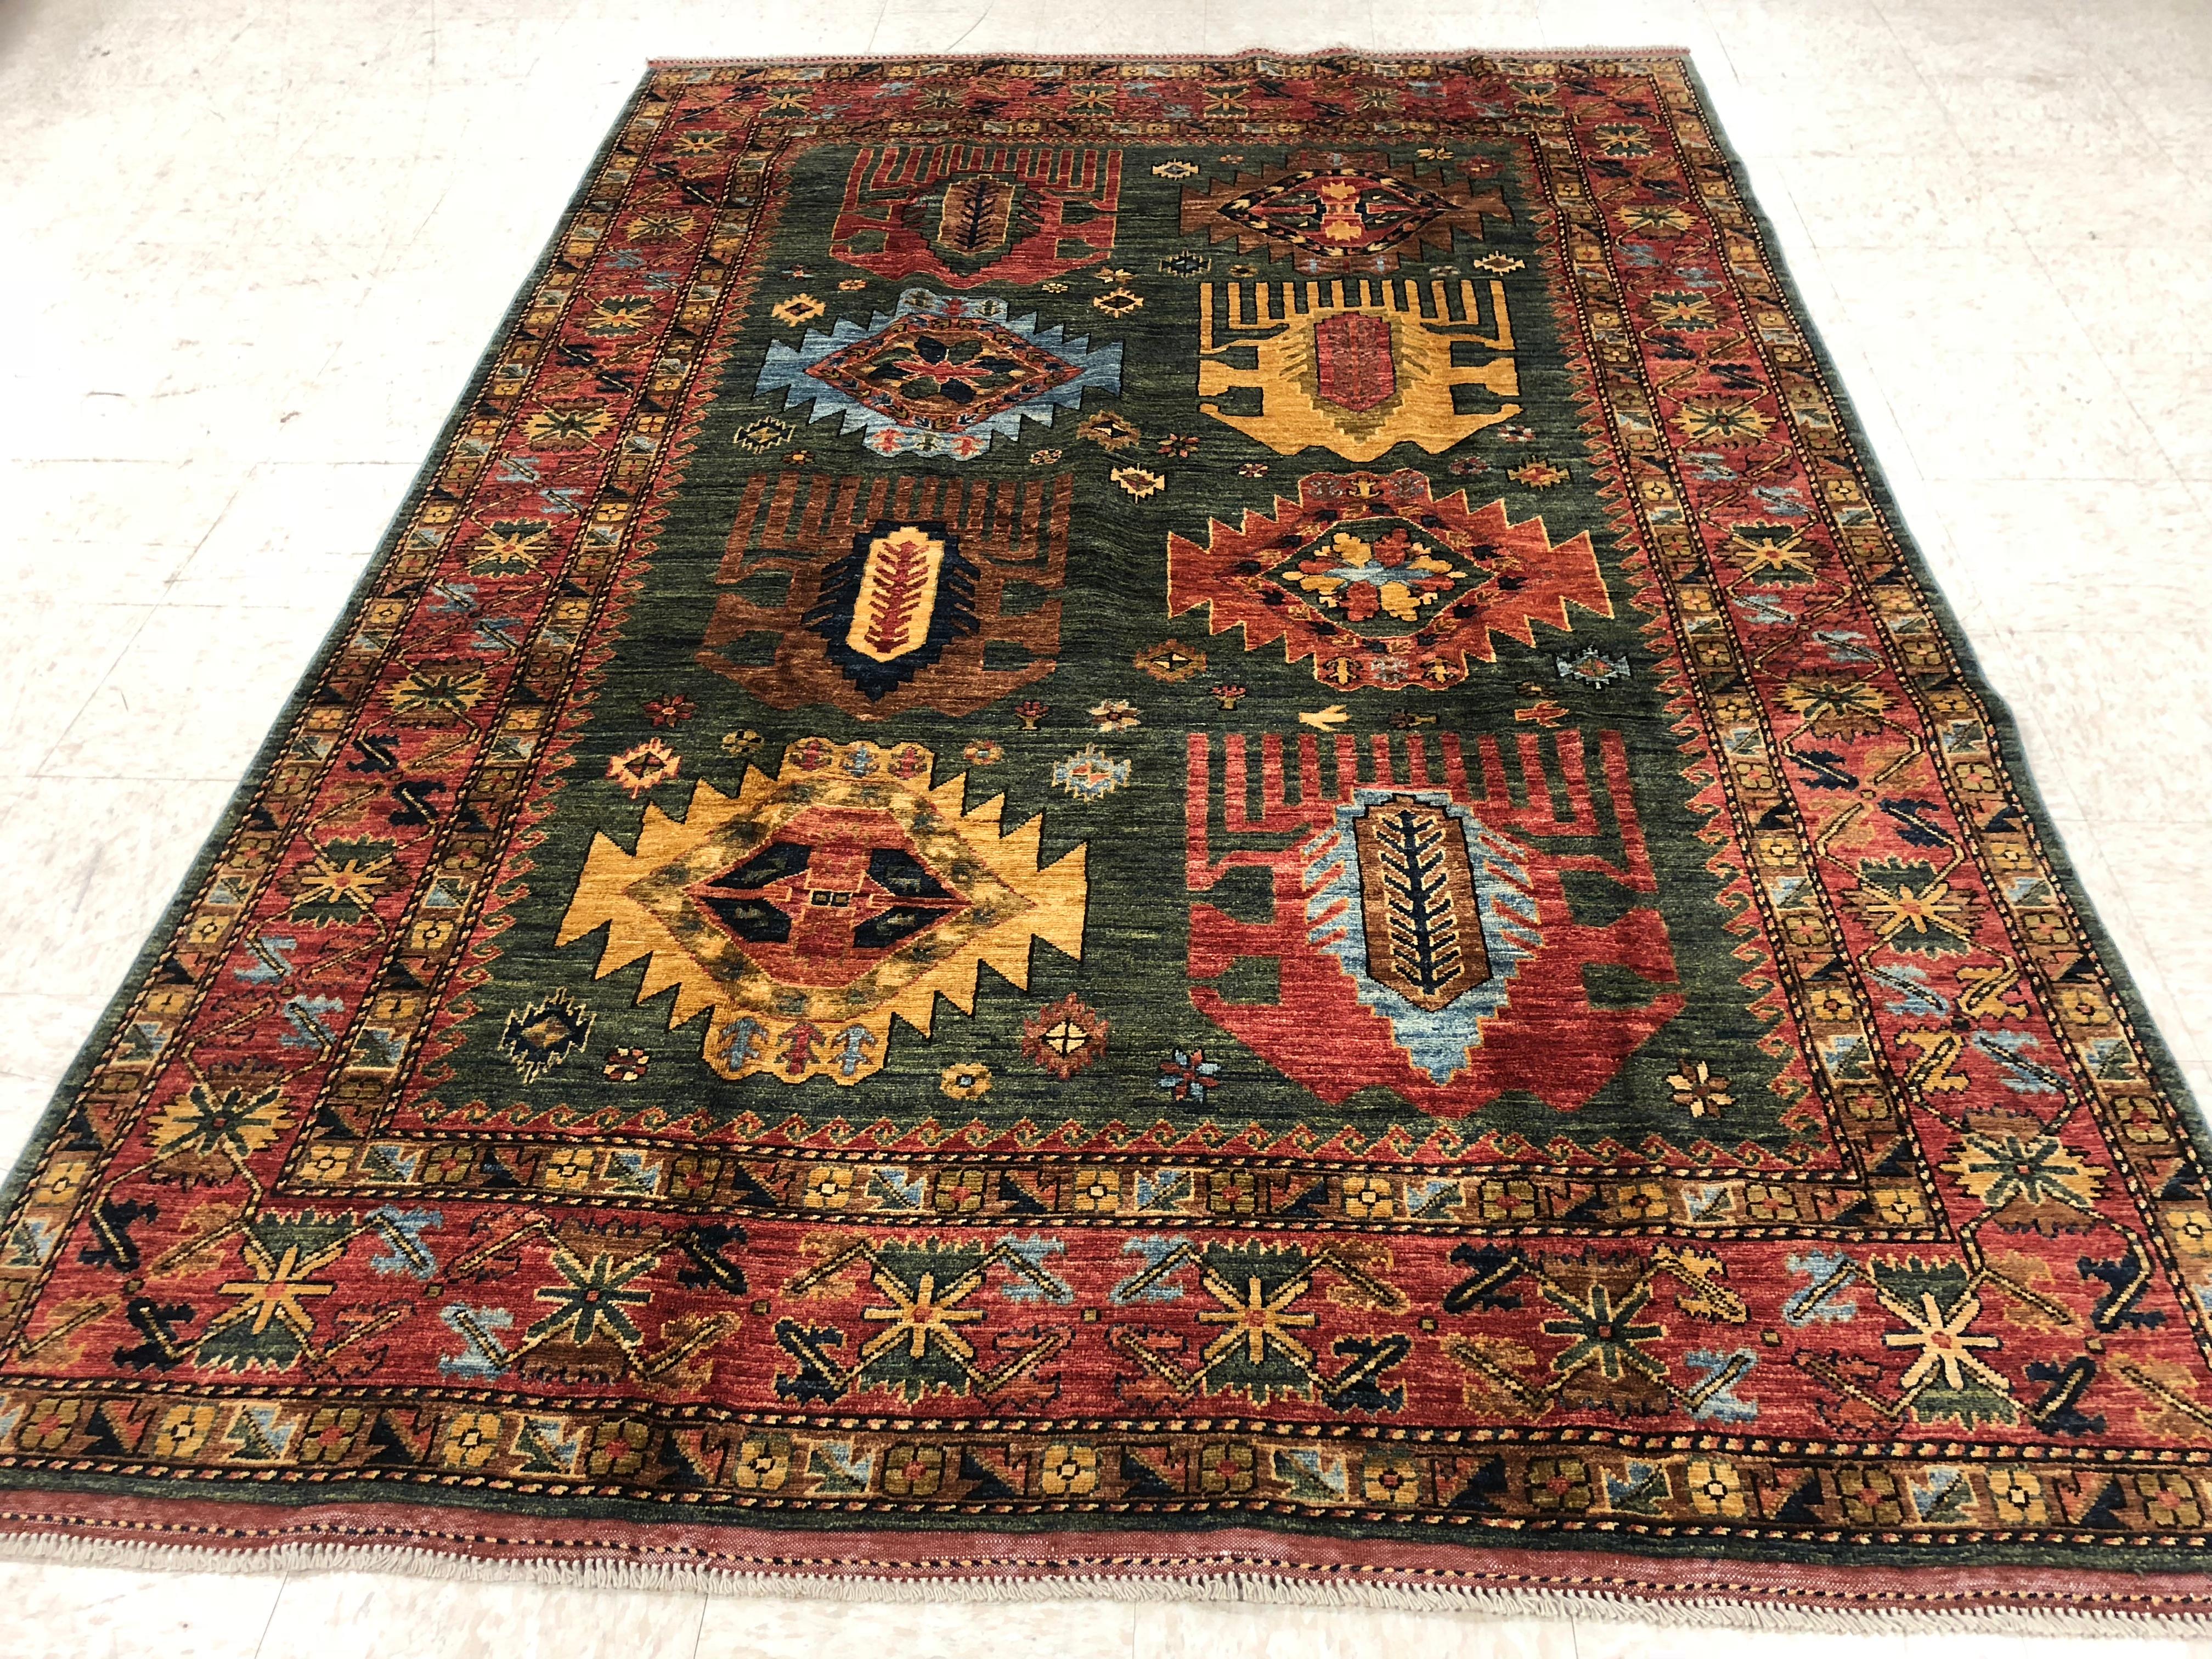 Afghan rugs are hand woven in Afghanistan. This country has a long history in weaving rugs. A big number of rugs that were hand woven in Pakistan were actually hand woven by Afghan refugees who fled Afghanistan after Russia invaded this country in